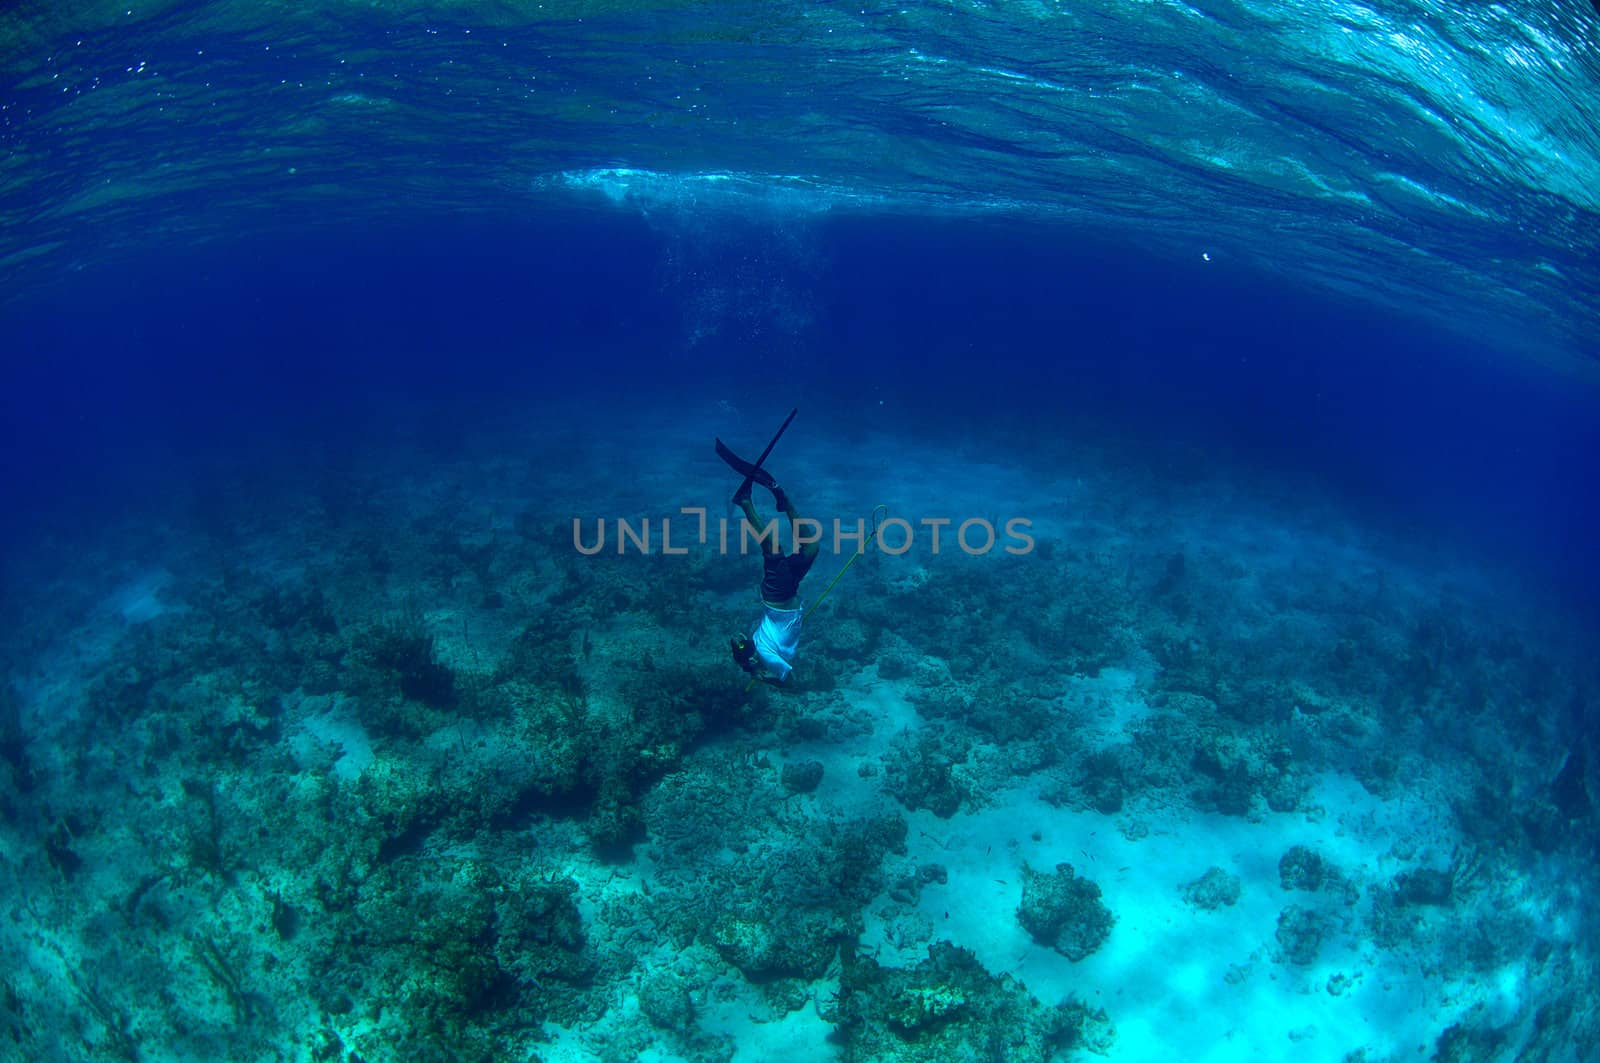 Man free diving and spear fishing by ftlaudgirl